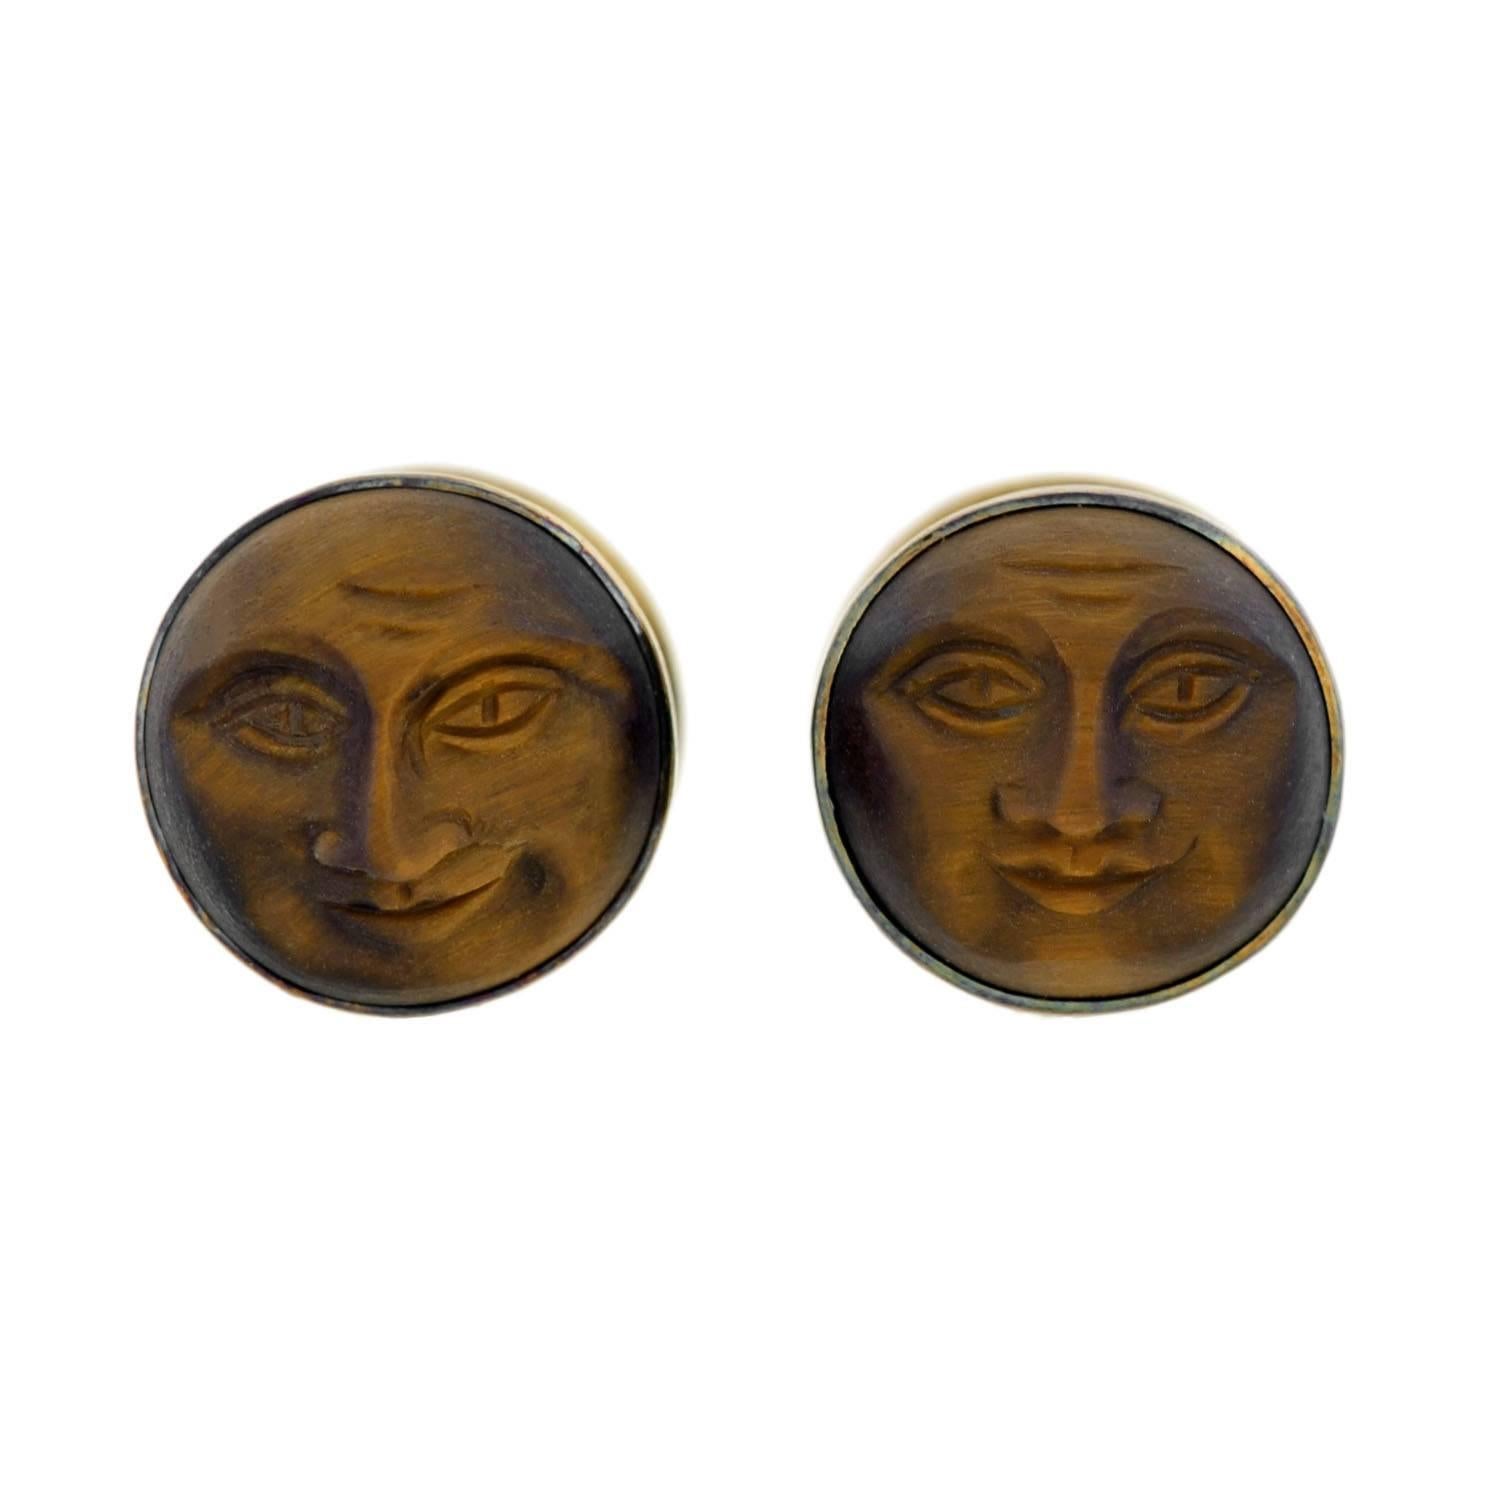 A rare and unusual pair of cufflinks from the Victorian (ca1880) era! Each double-sided cufflink has two carved tiger's eye stones with a 